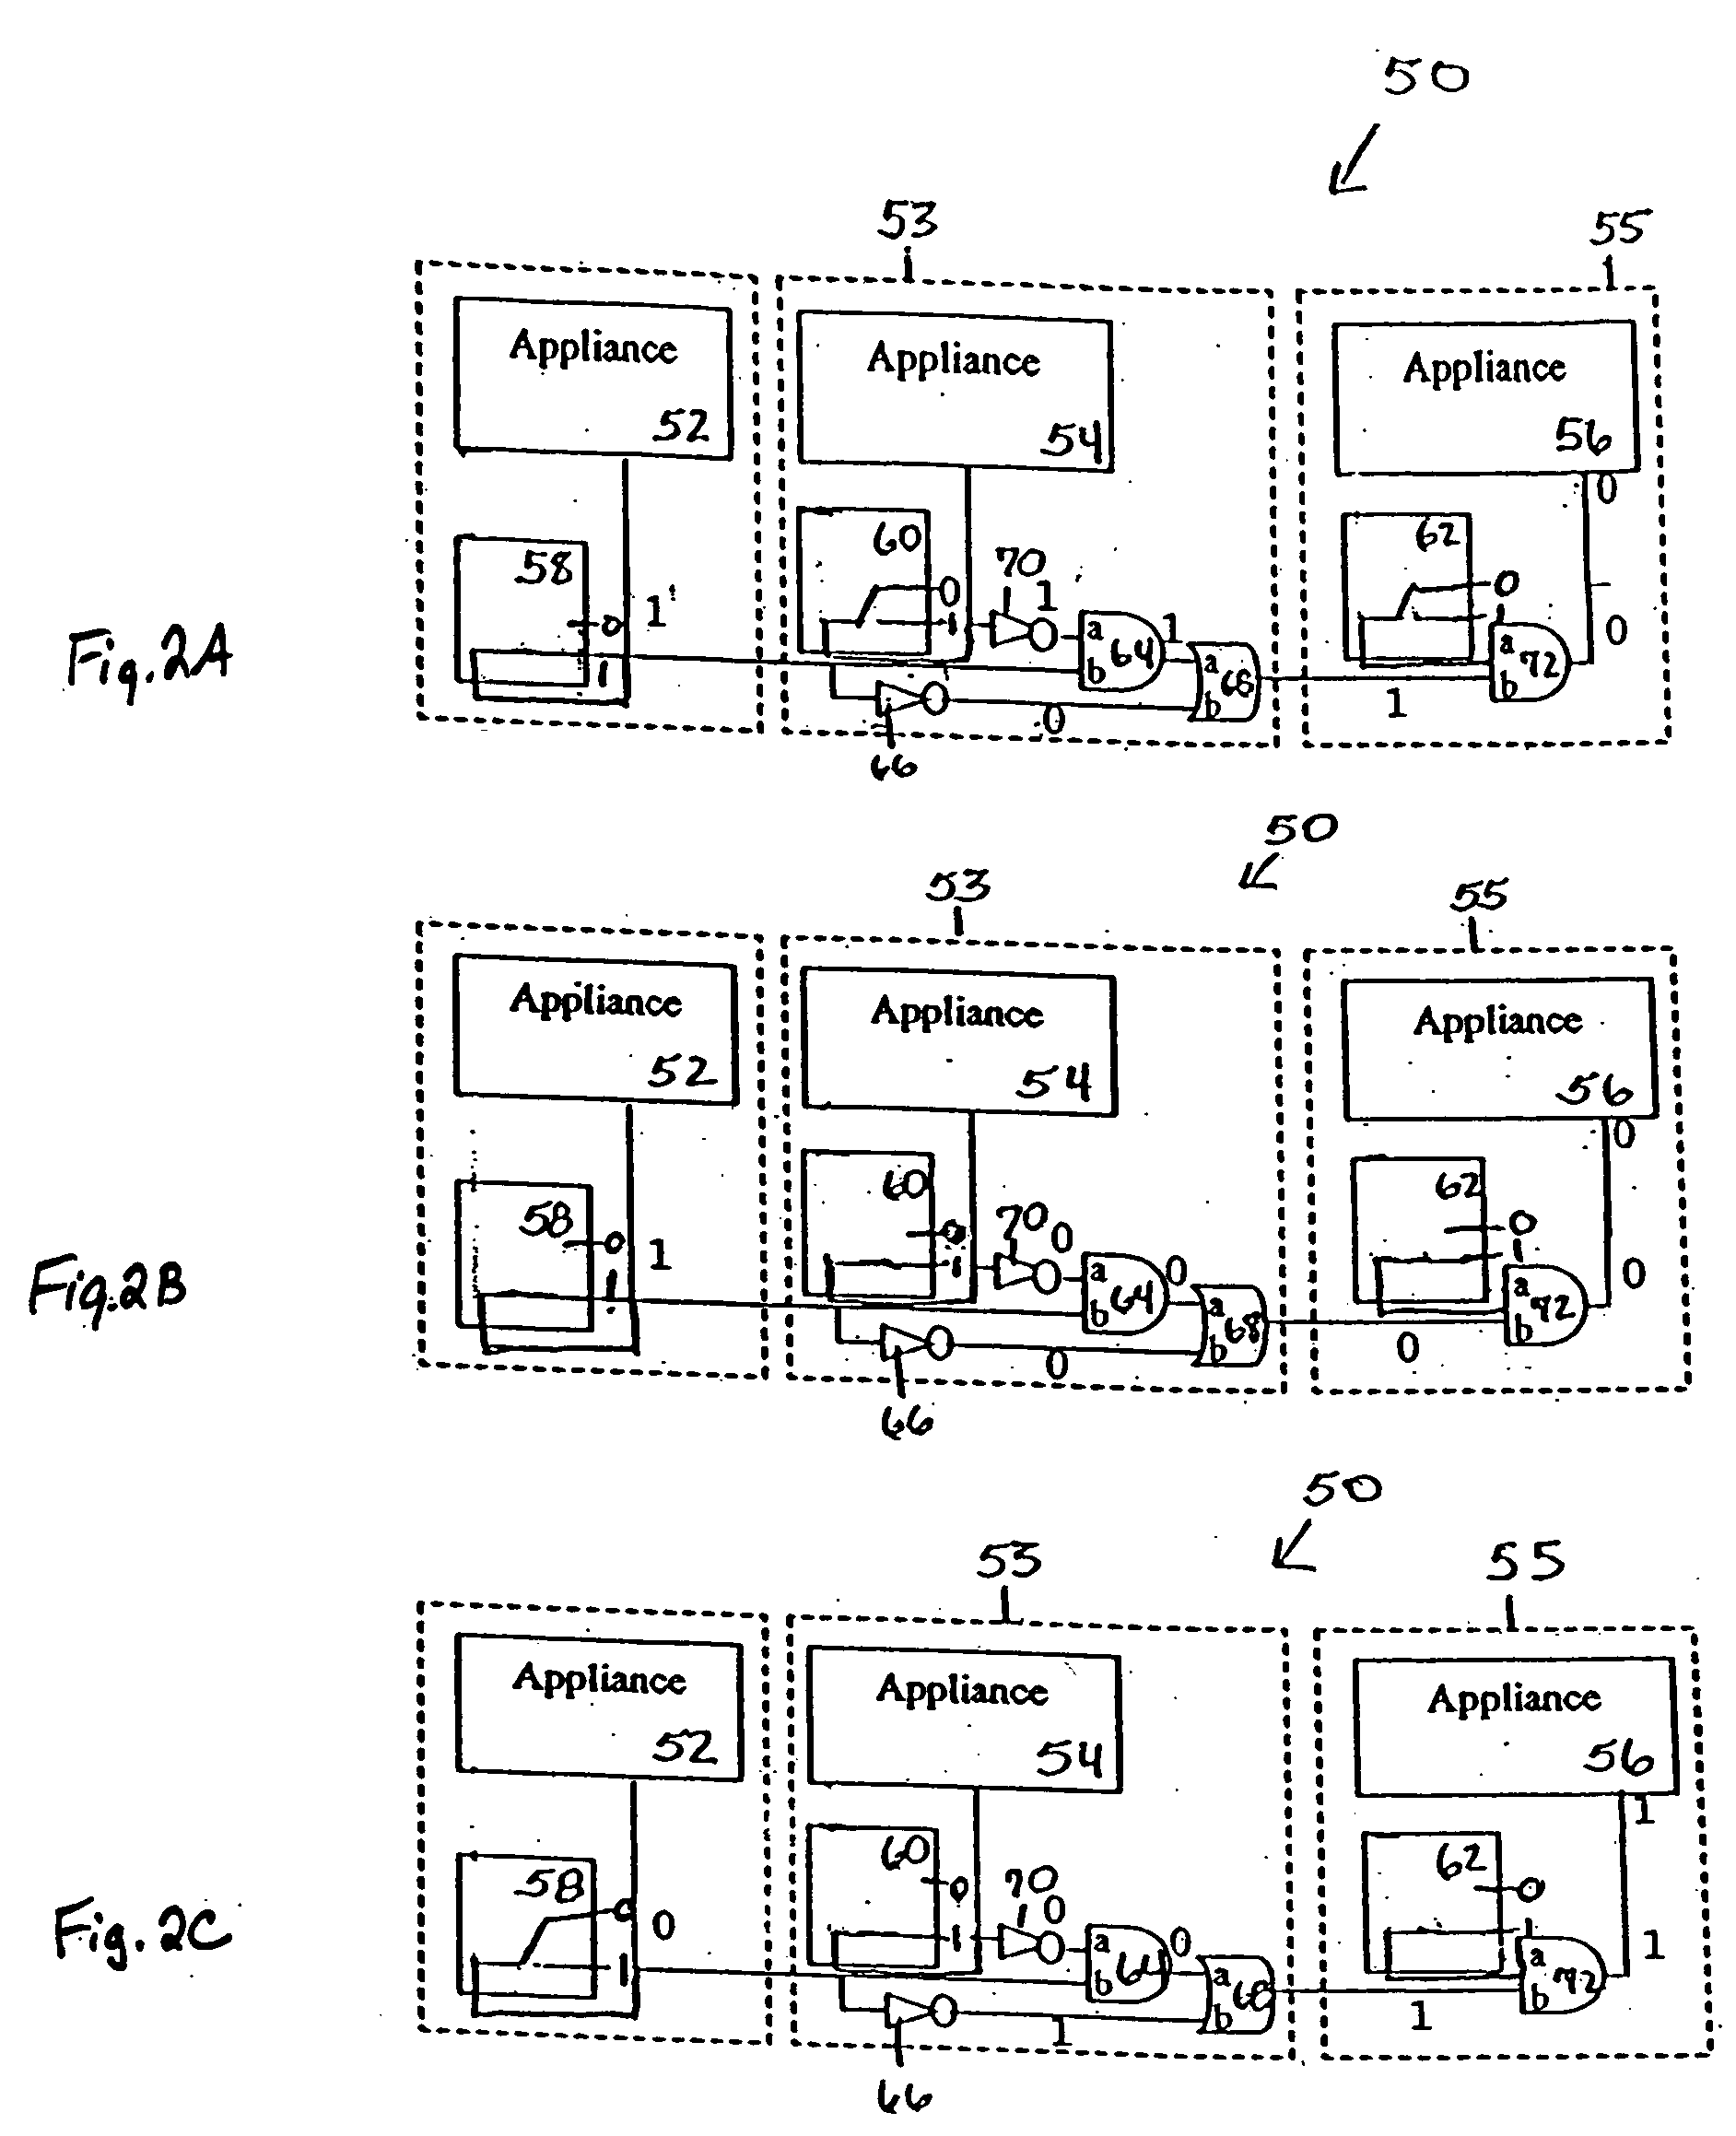 System and method for supply distribution